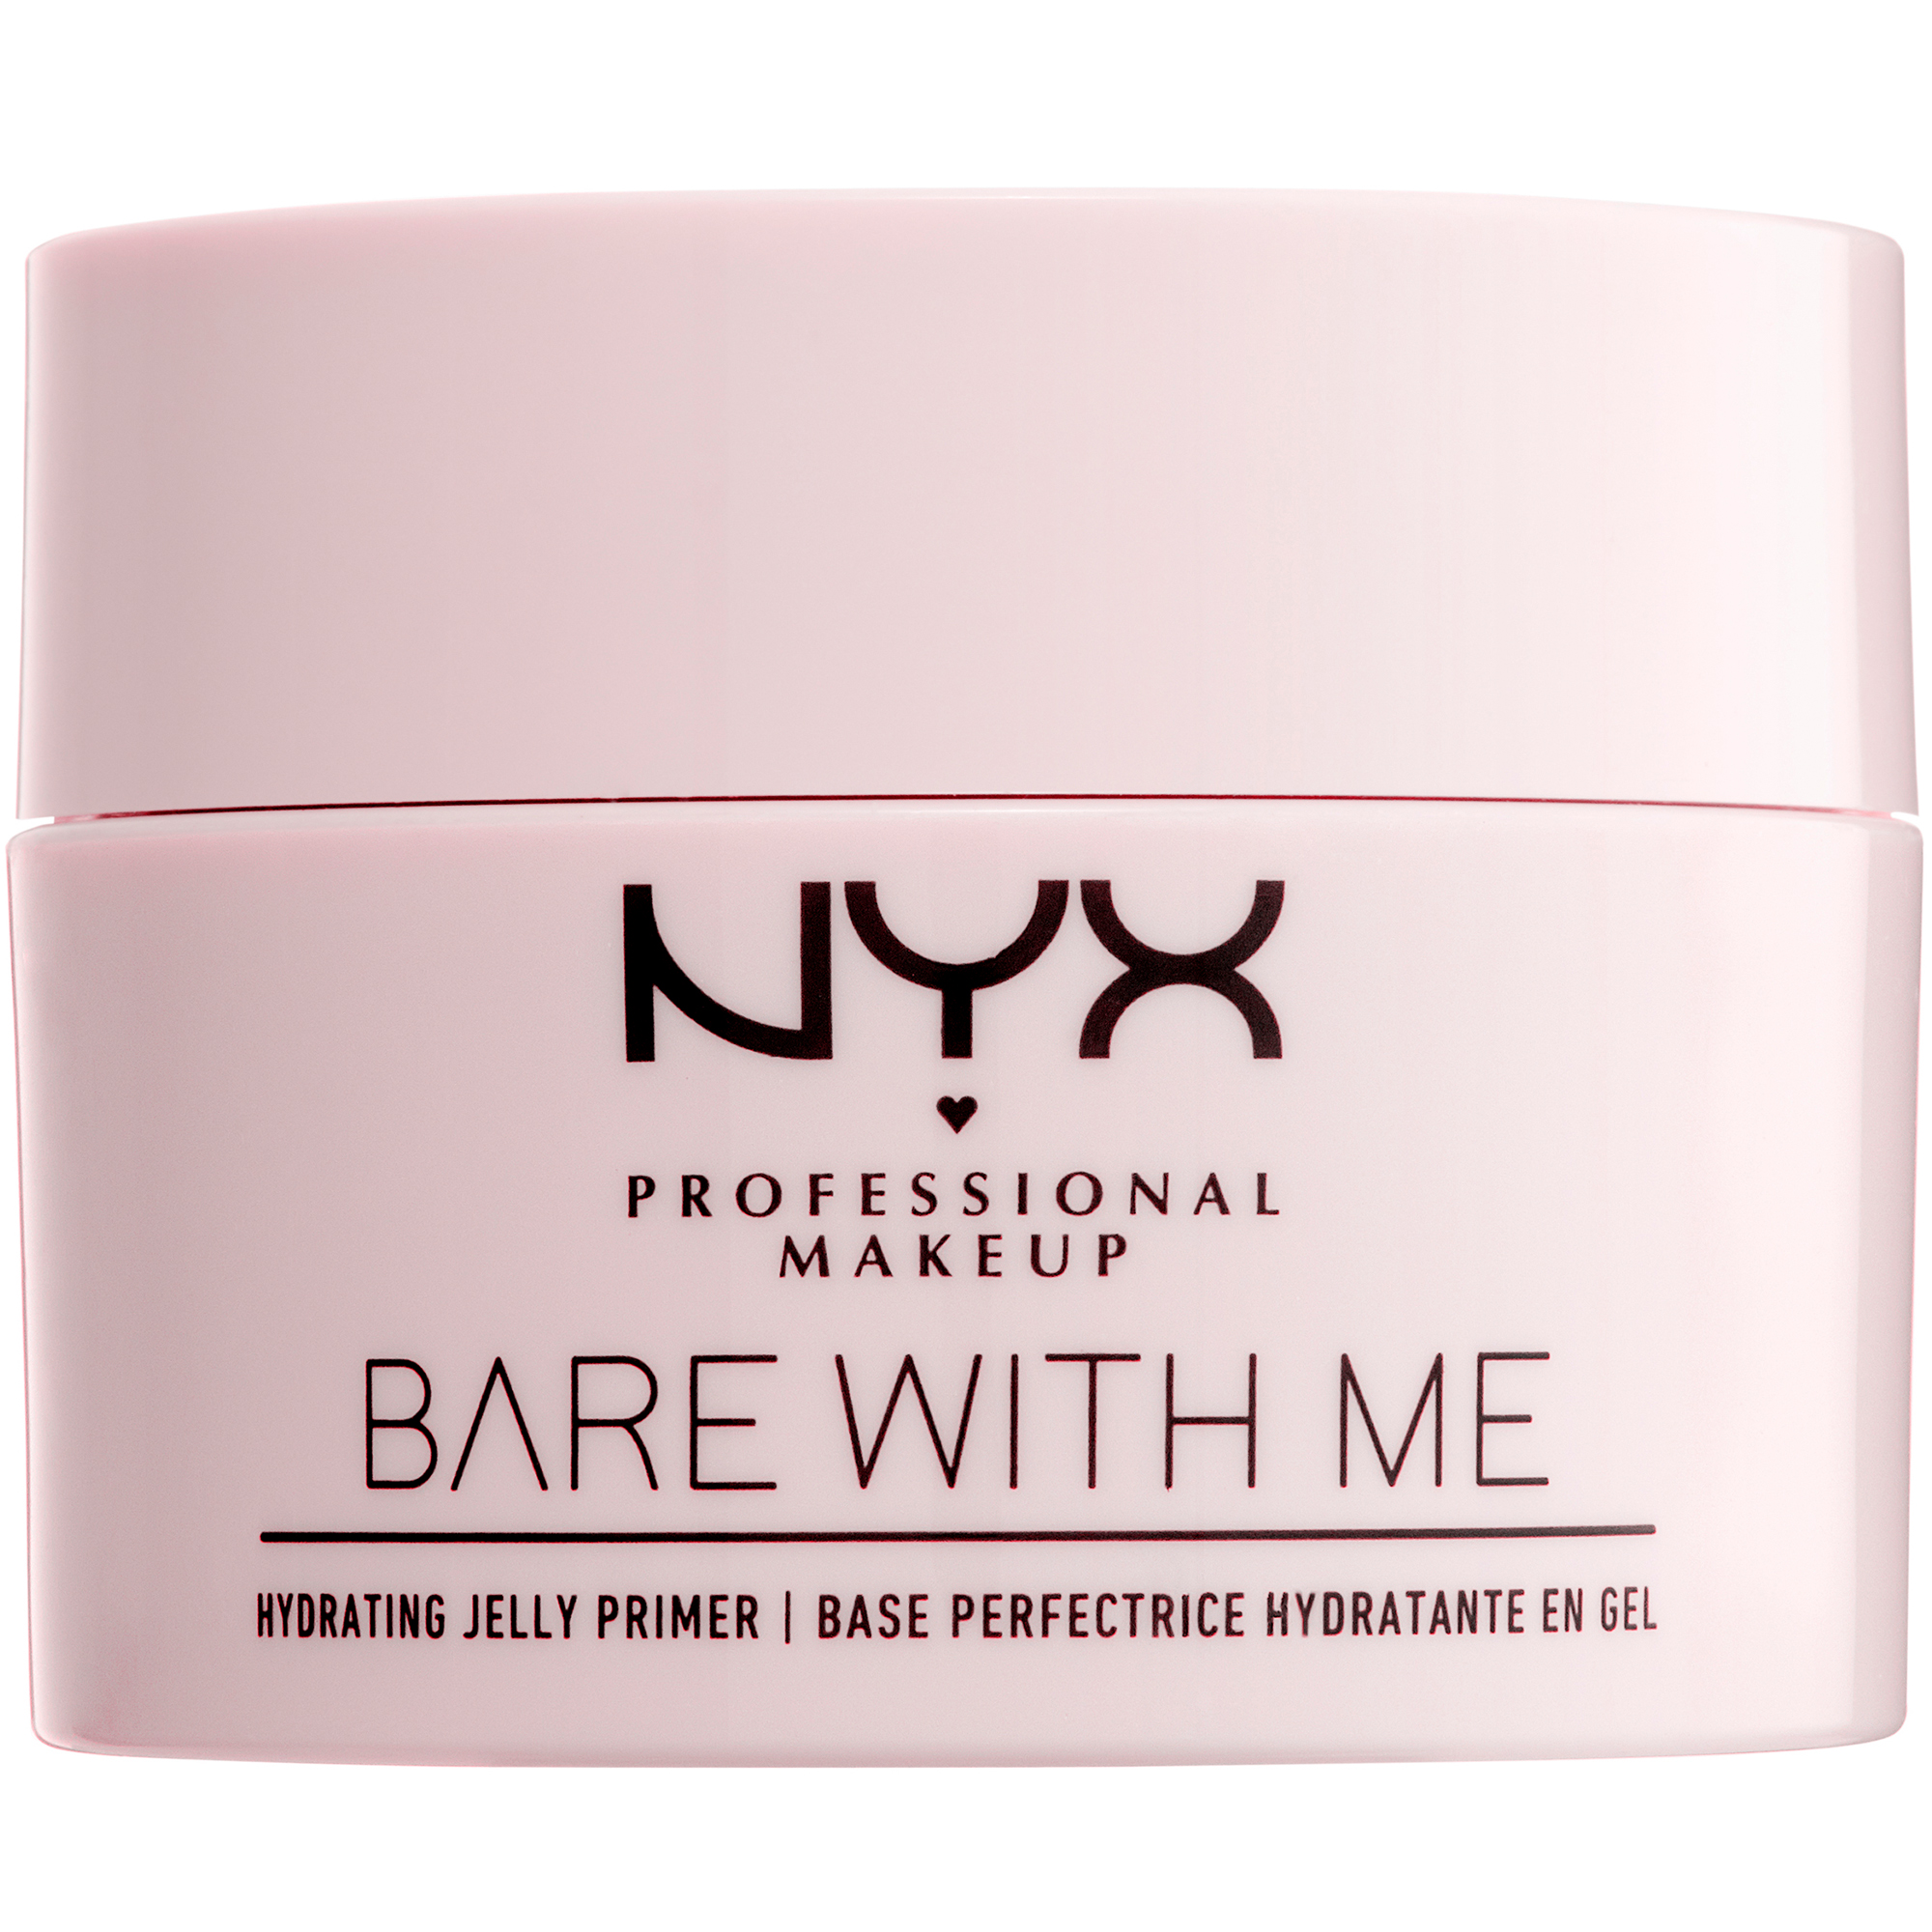 Bare With Me Hydrating Jelly Primer, NYX Professional Makeup Primer